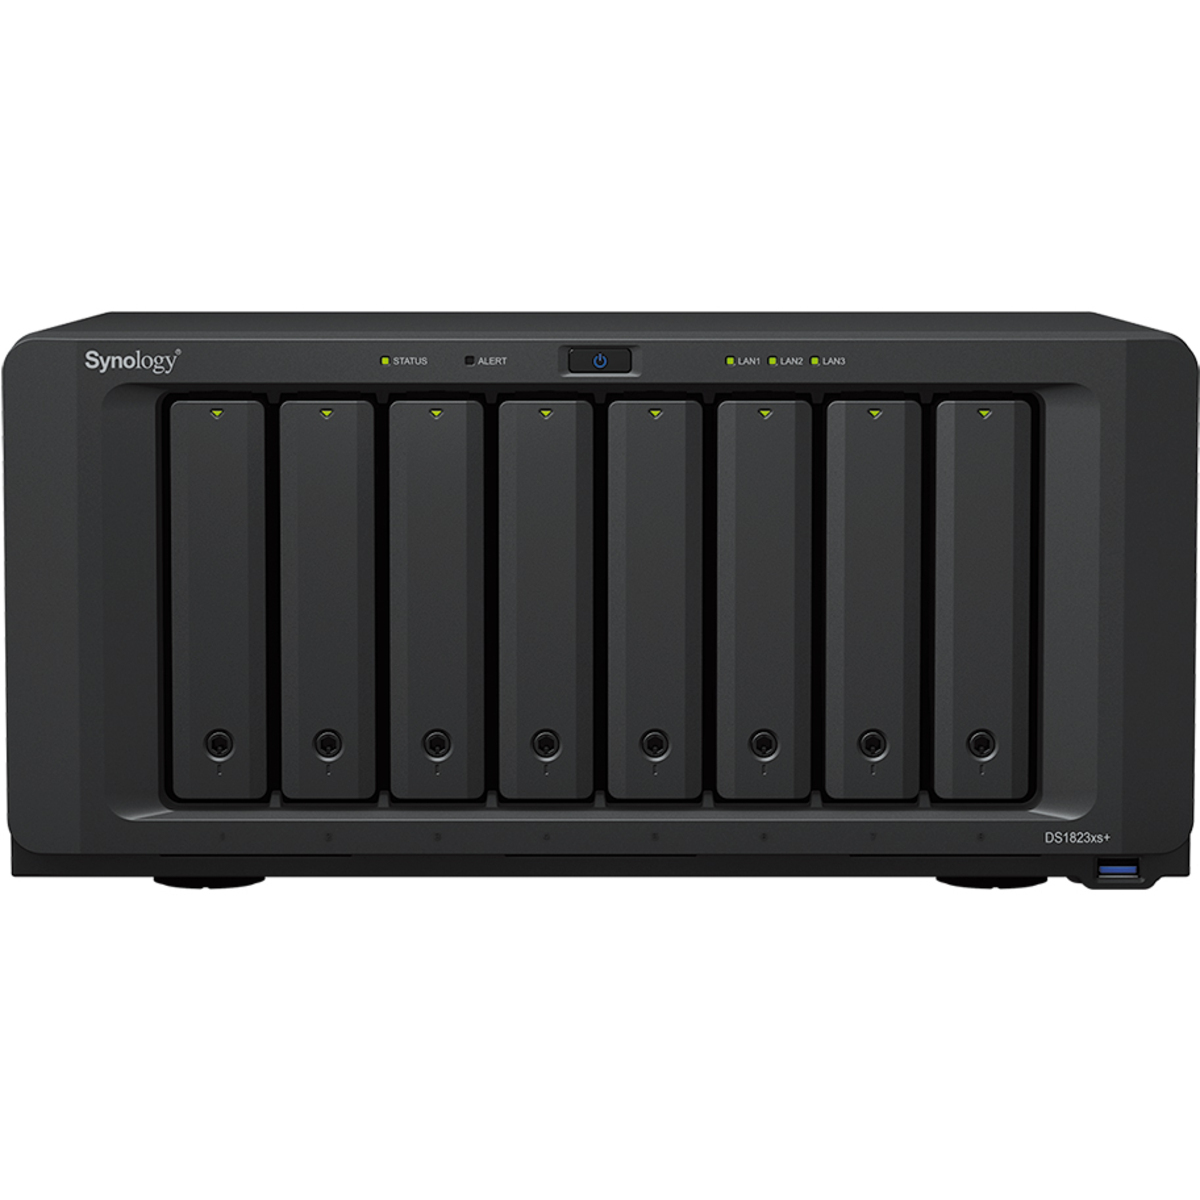 Synology DiskStation DS1823xs+ 108tb 8-Bay Desktop Multimedia / Power User / Business NAS - Network Attached Storage Device 6x18tb Western Digital Red Pro WD181KFGX 3.5 7200rpm SATA 6Gb/s HDD NAS Class Drives Installed - Burn-In Tested DiskStation DS1823xs+